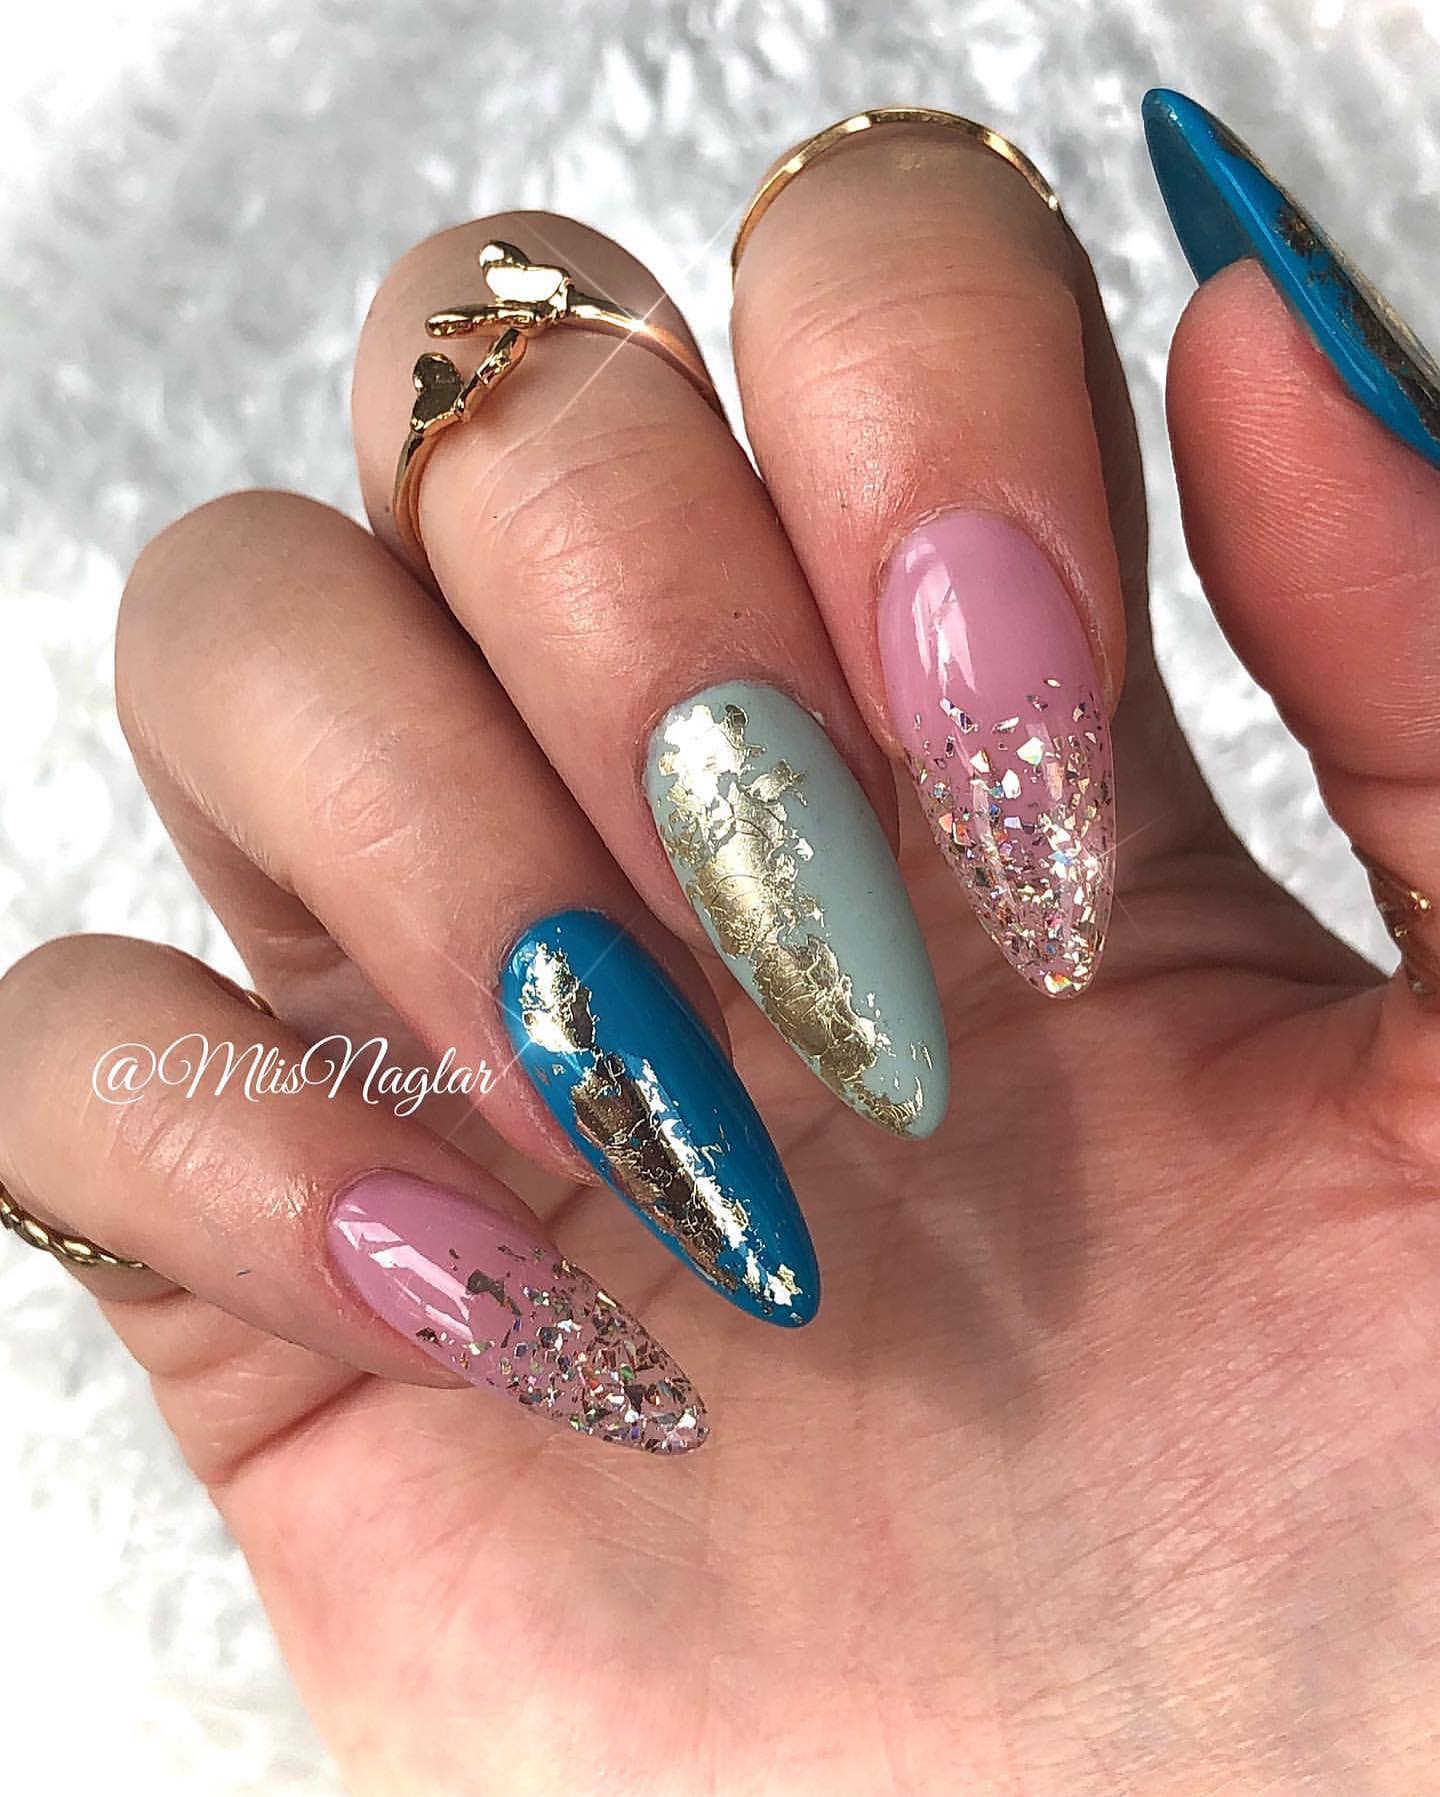 Long acrylic manicures such as this one will take some time to get. Book the best nail artist you know of to achieve this design.